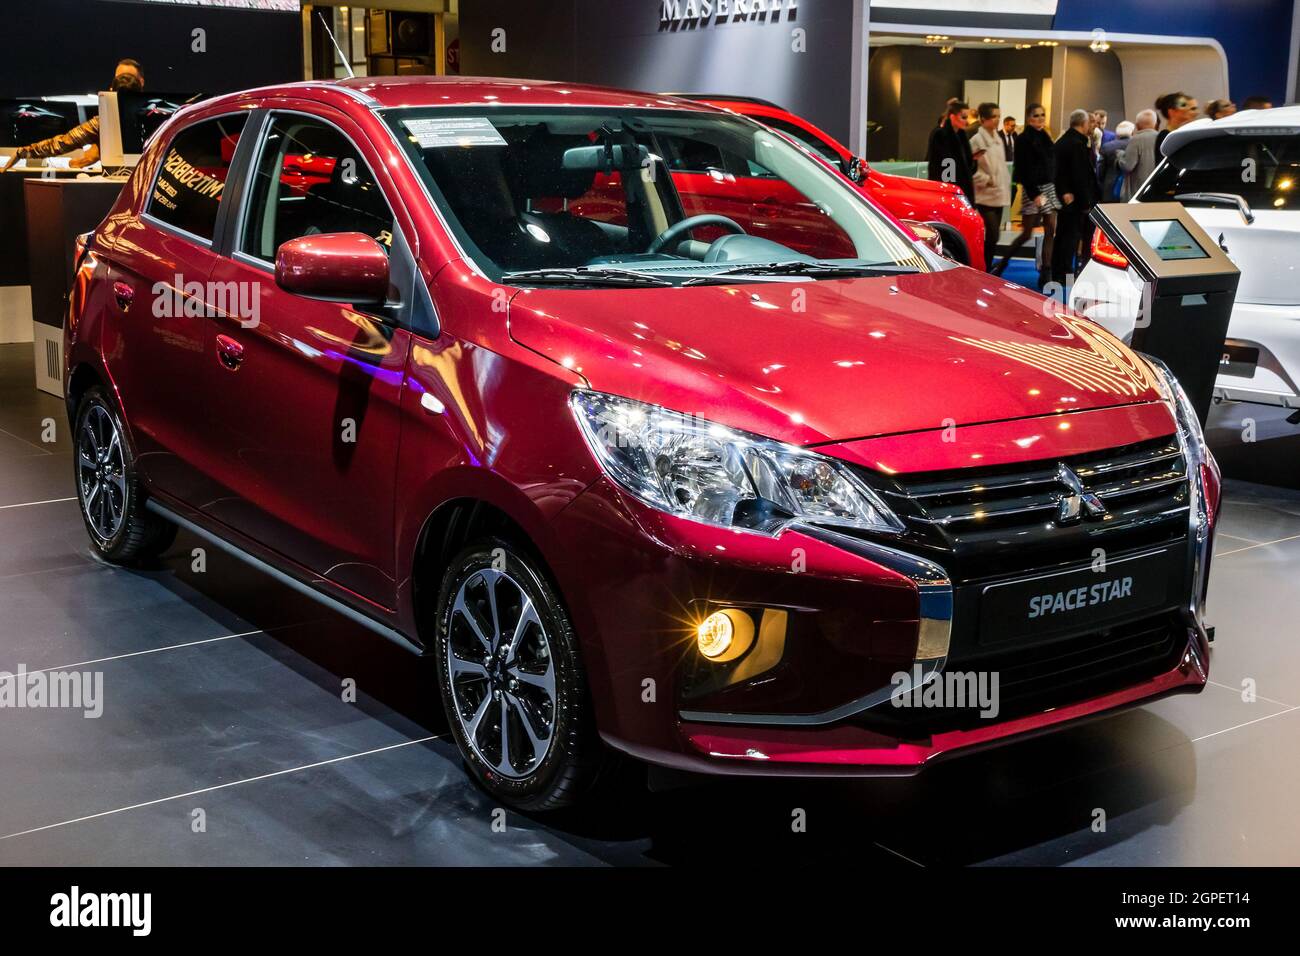 Mitsubishi Space Star new car model shown at the Autosalon 2020 Motor Show. Brussels, Belgium - January 9, 2020. Stock Photo